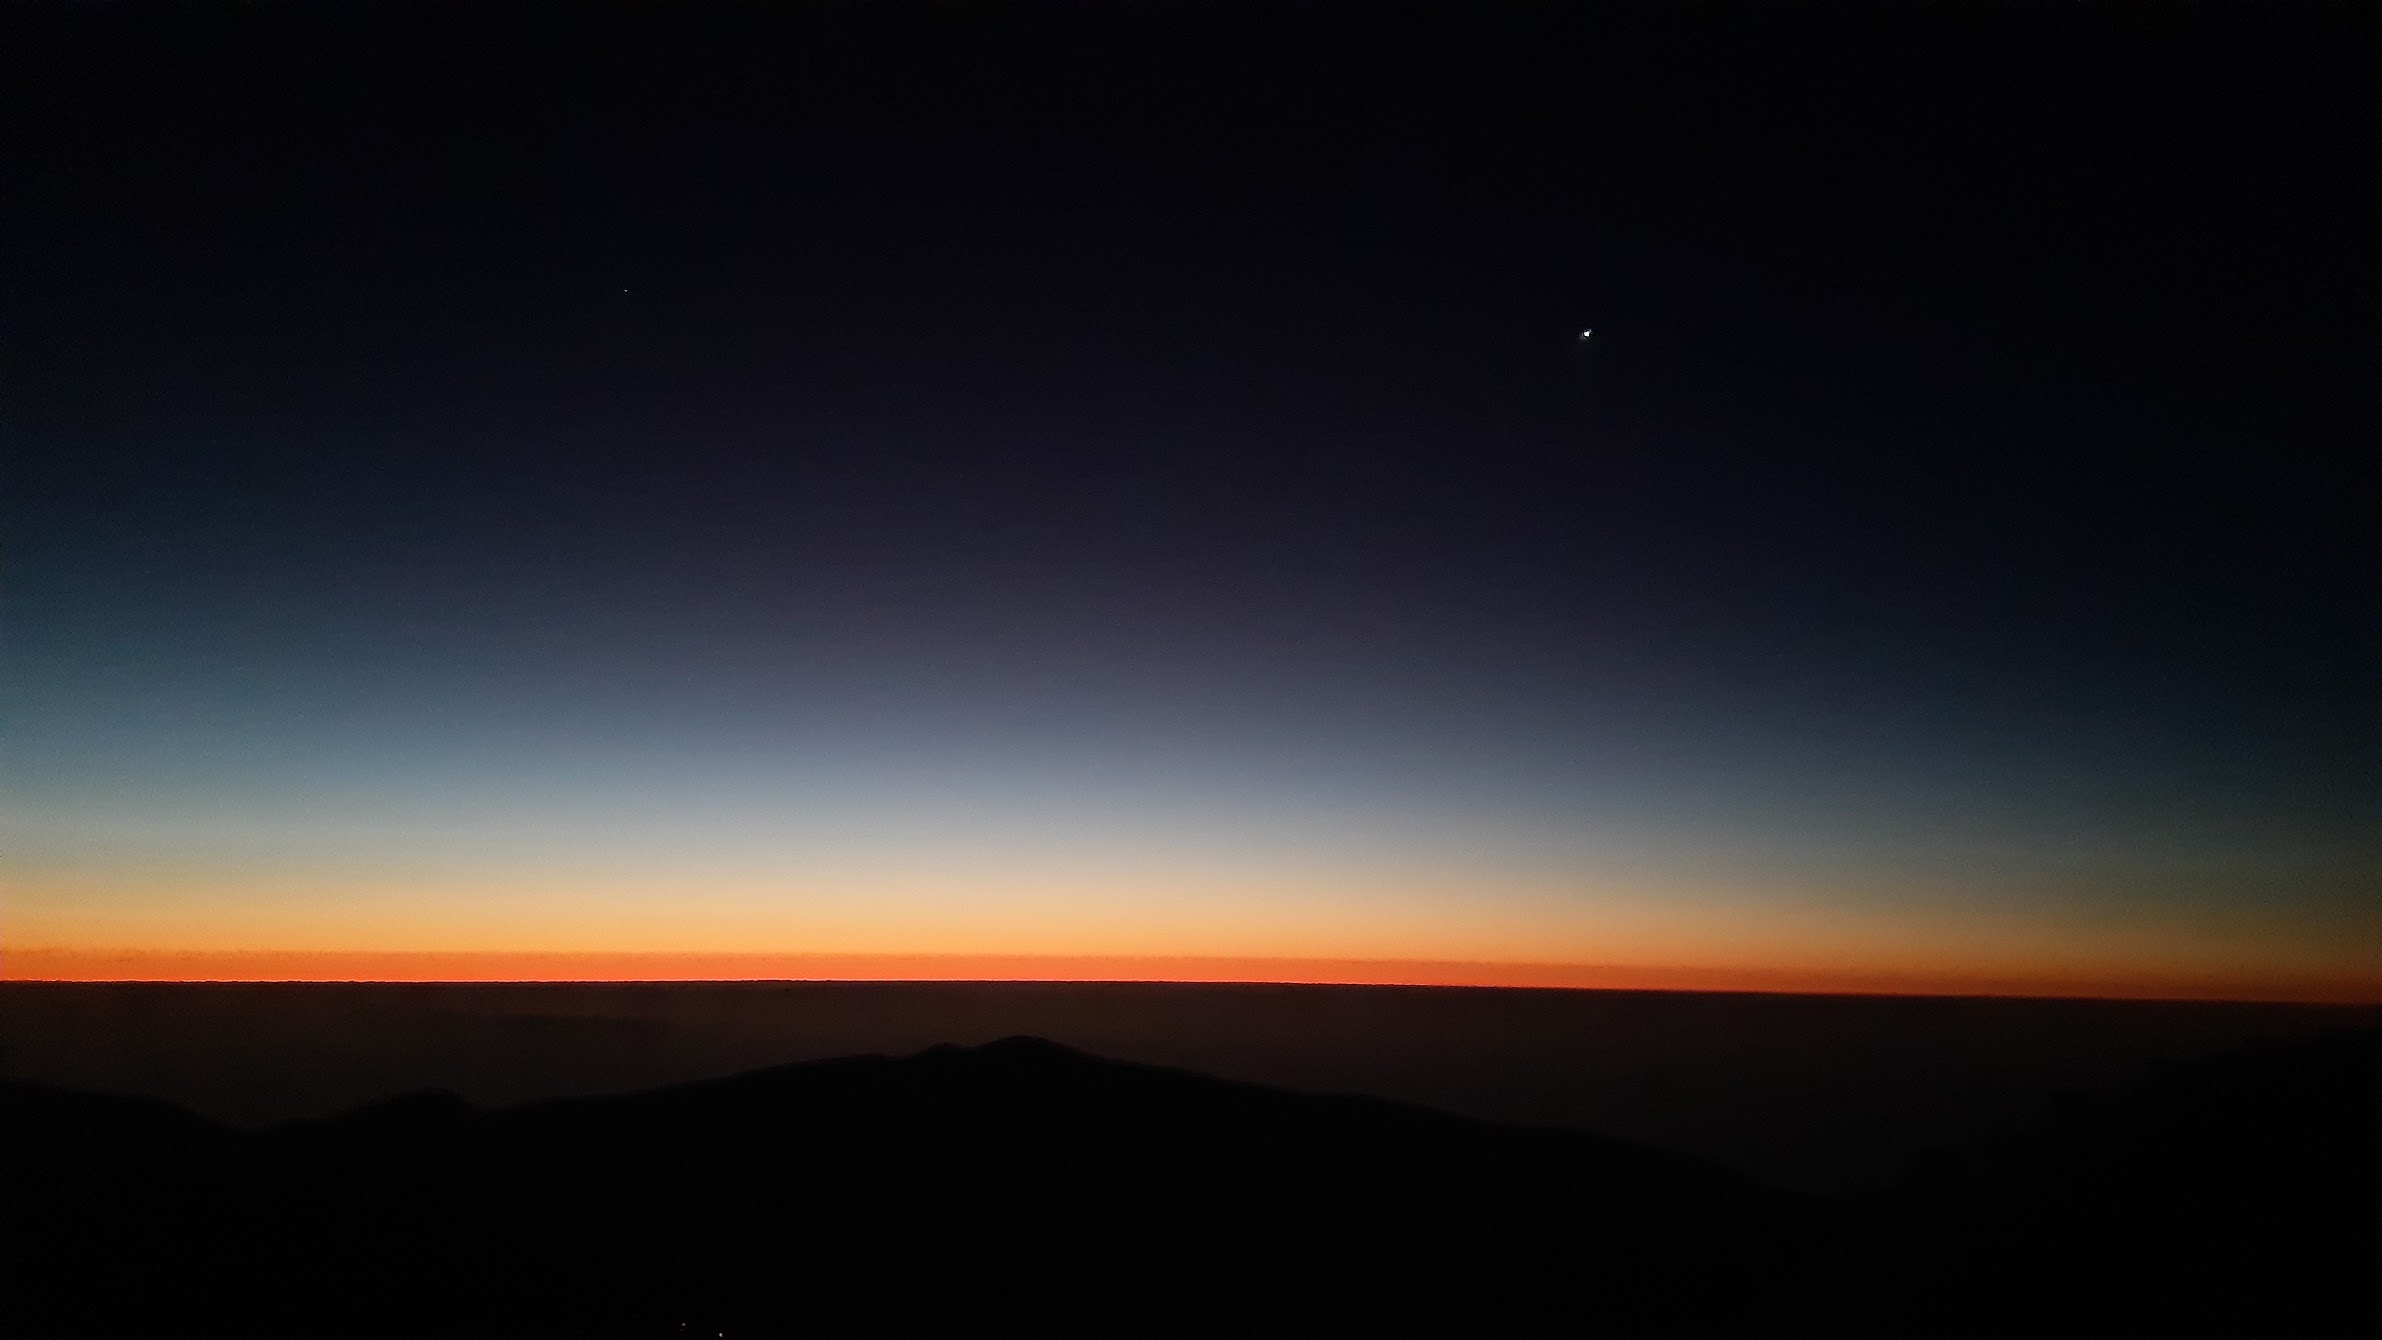 A view of the sky at dusk from the VLT